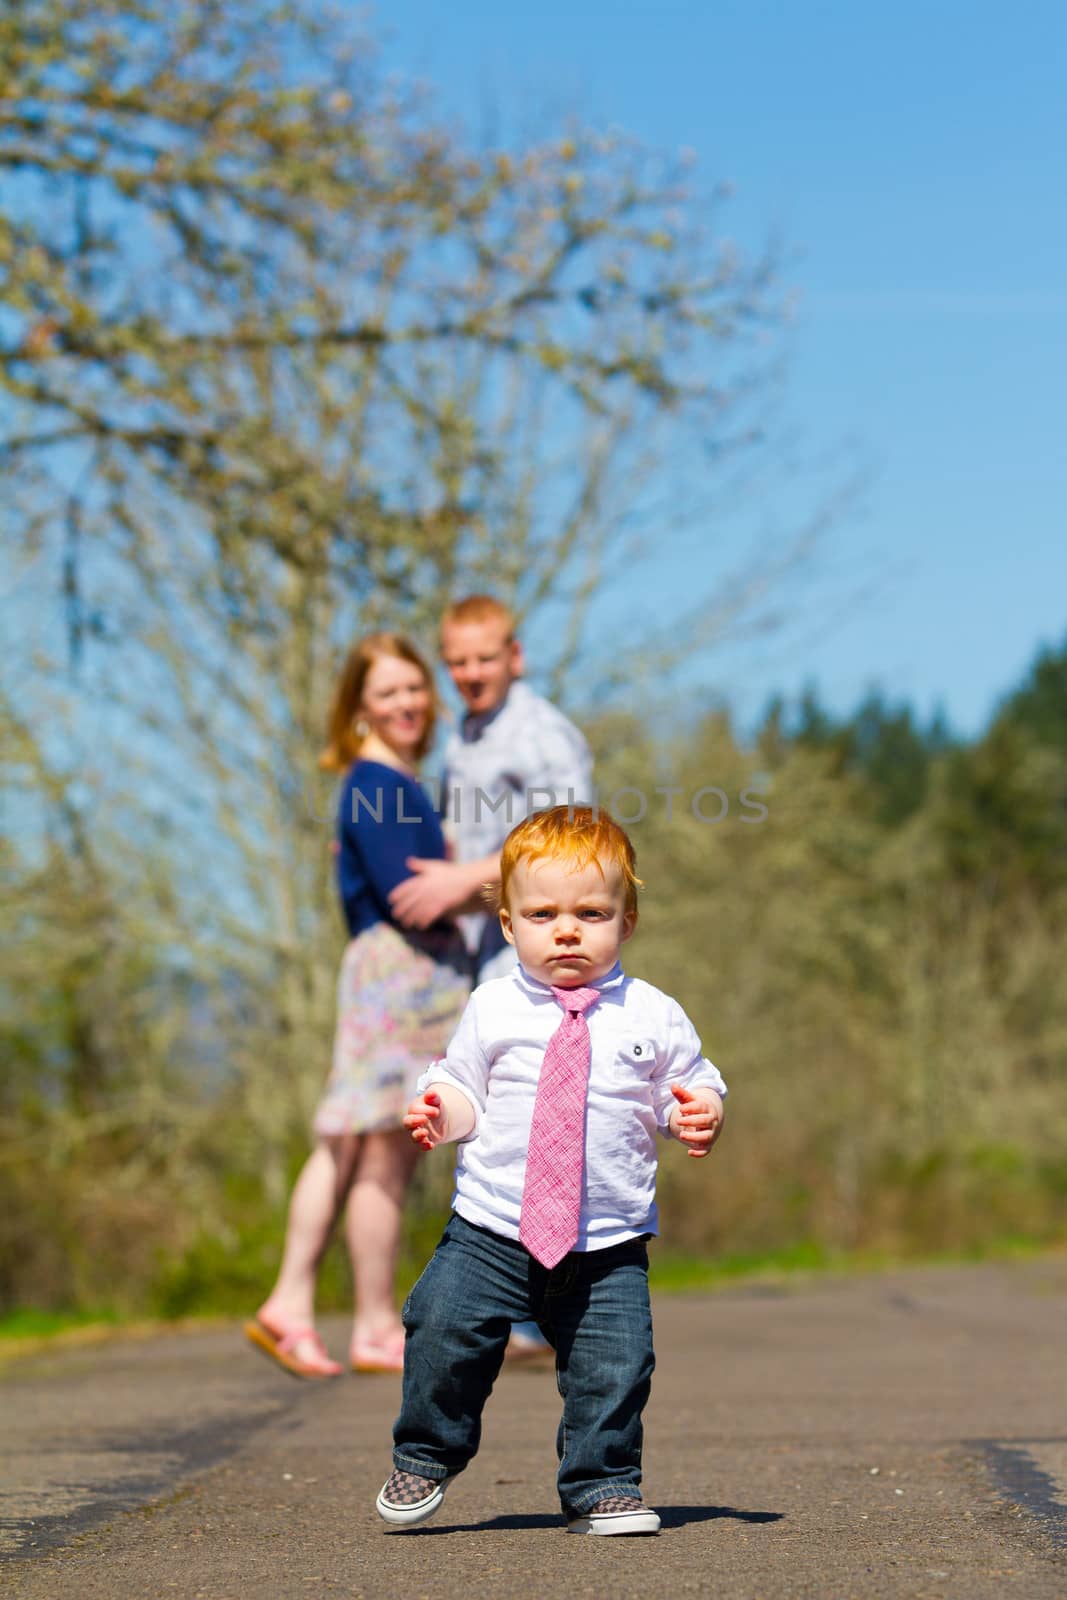 Parents are out of focus in this selective focus image while a baby boy runs toward the camera.